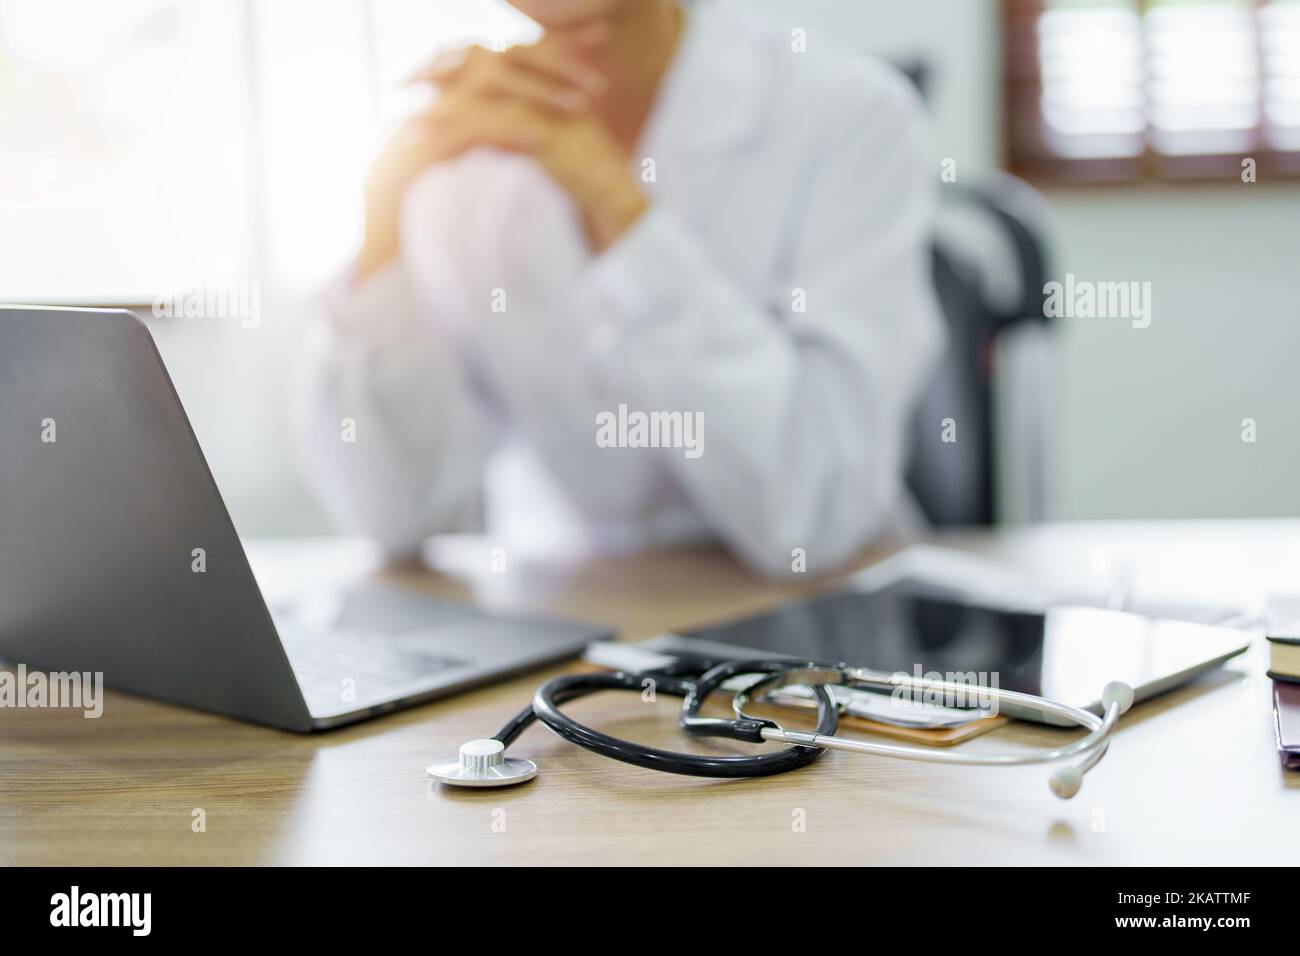 An Asian female doctor uses a computer while showing concern about patient information Stock Photo